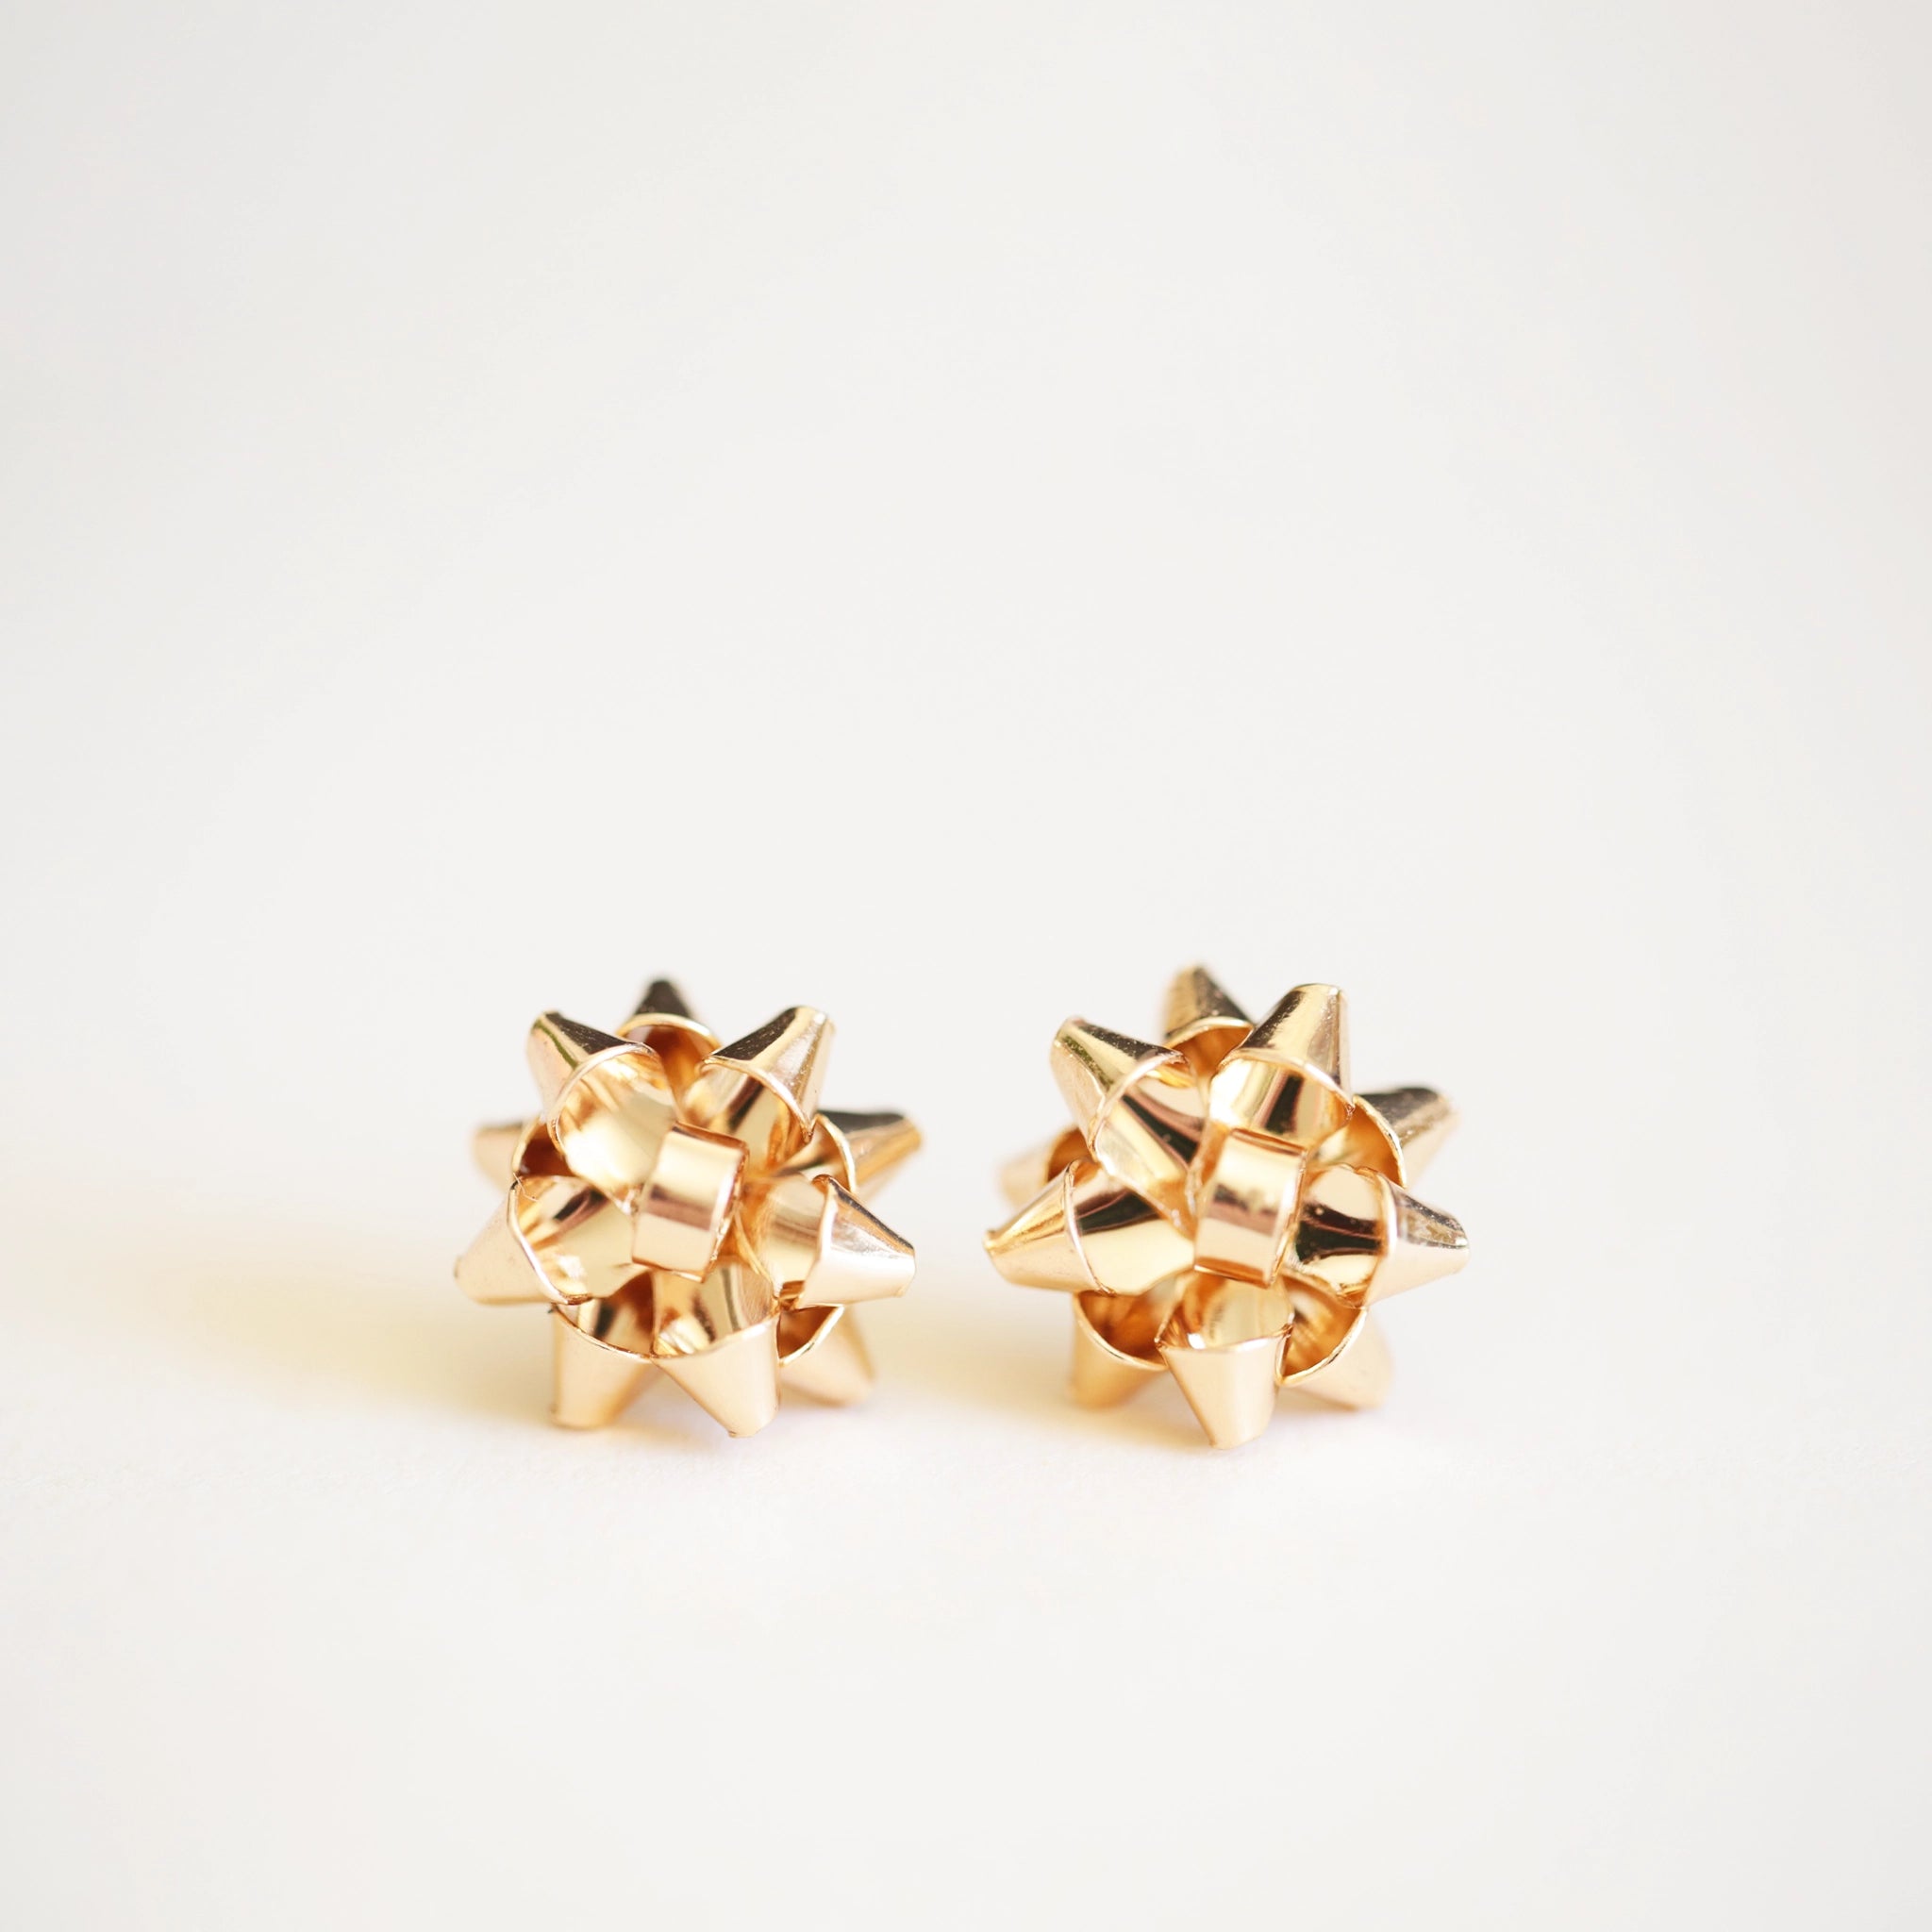 On an ivory background is a pair of gold earrings in the shape of holiday bows.